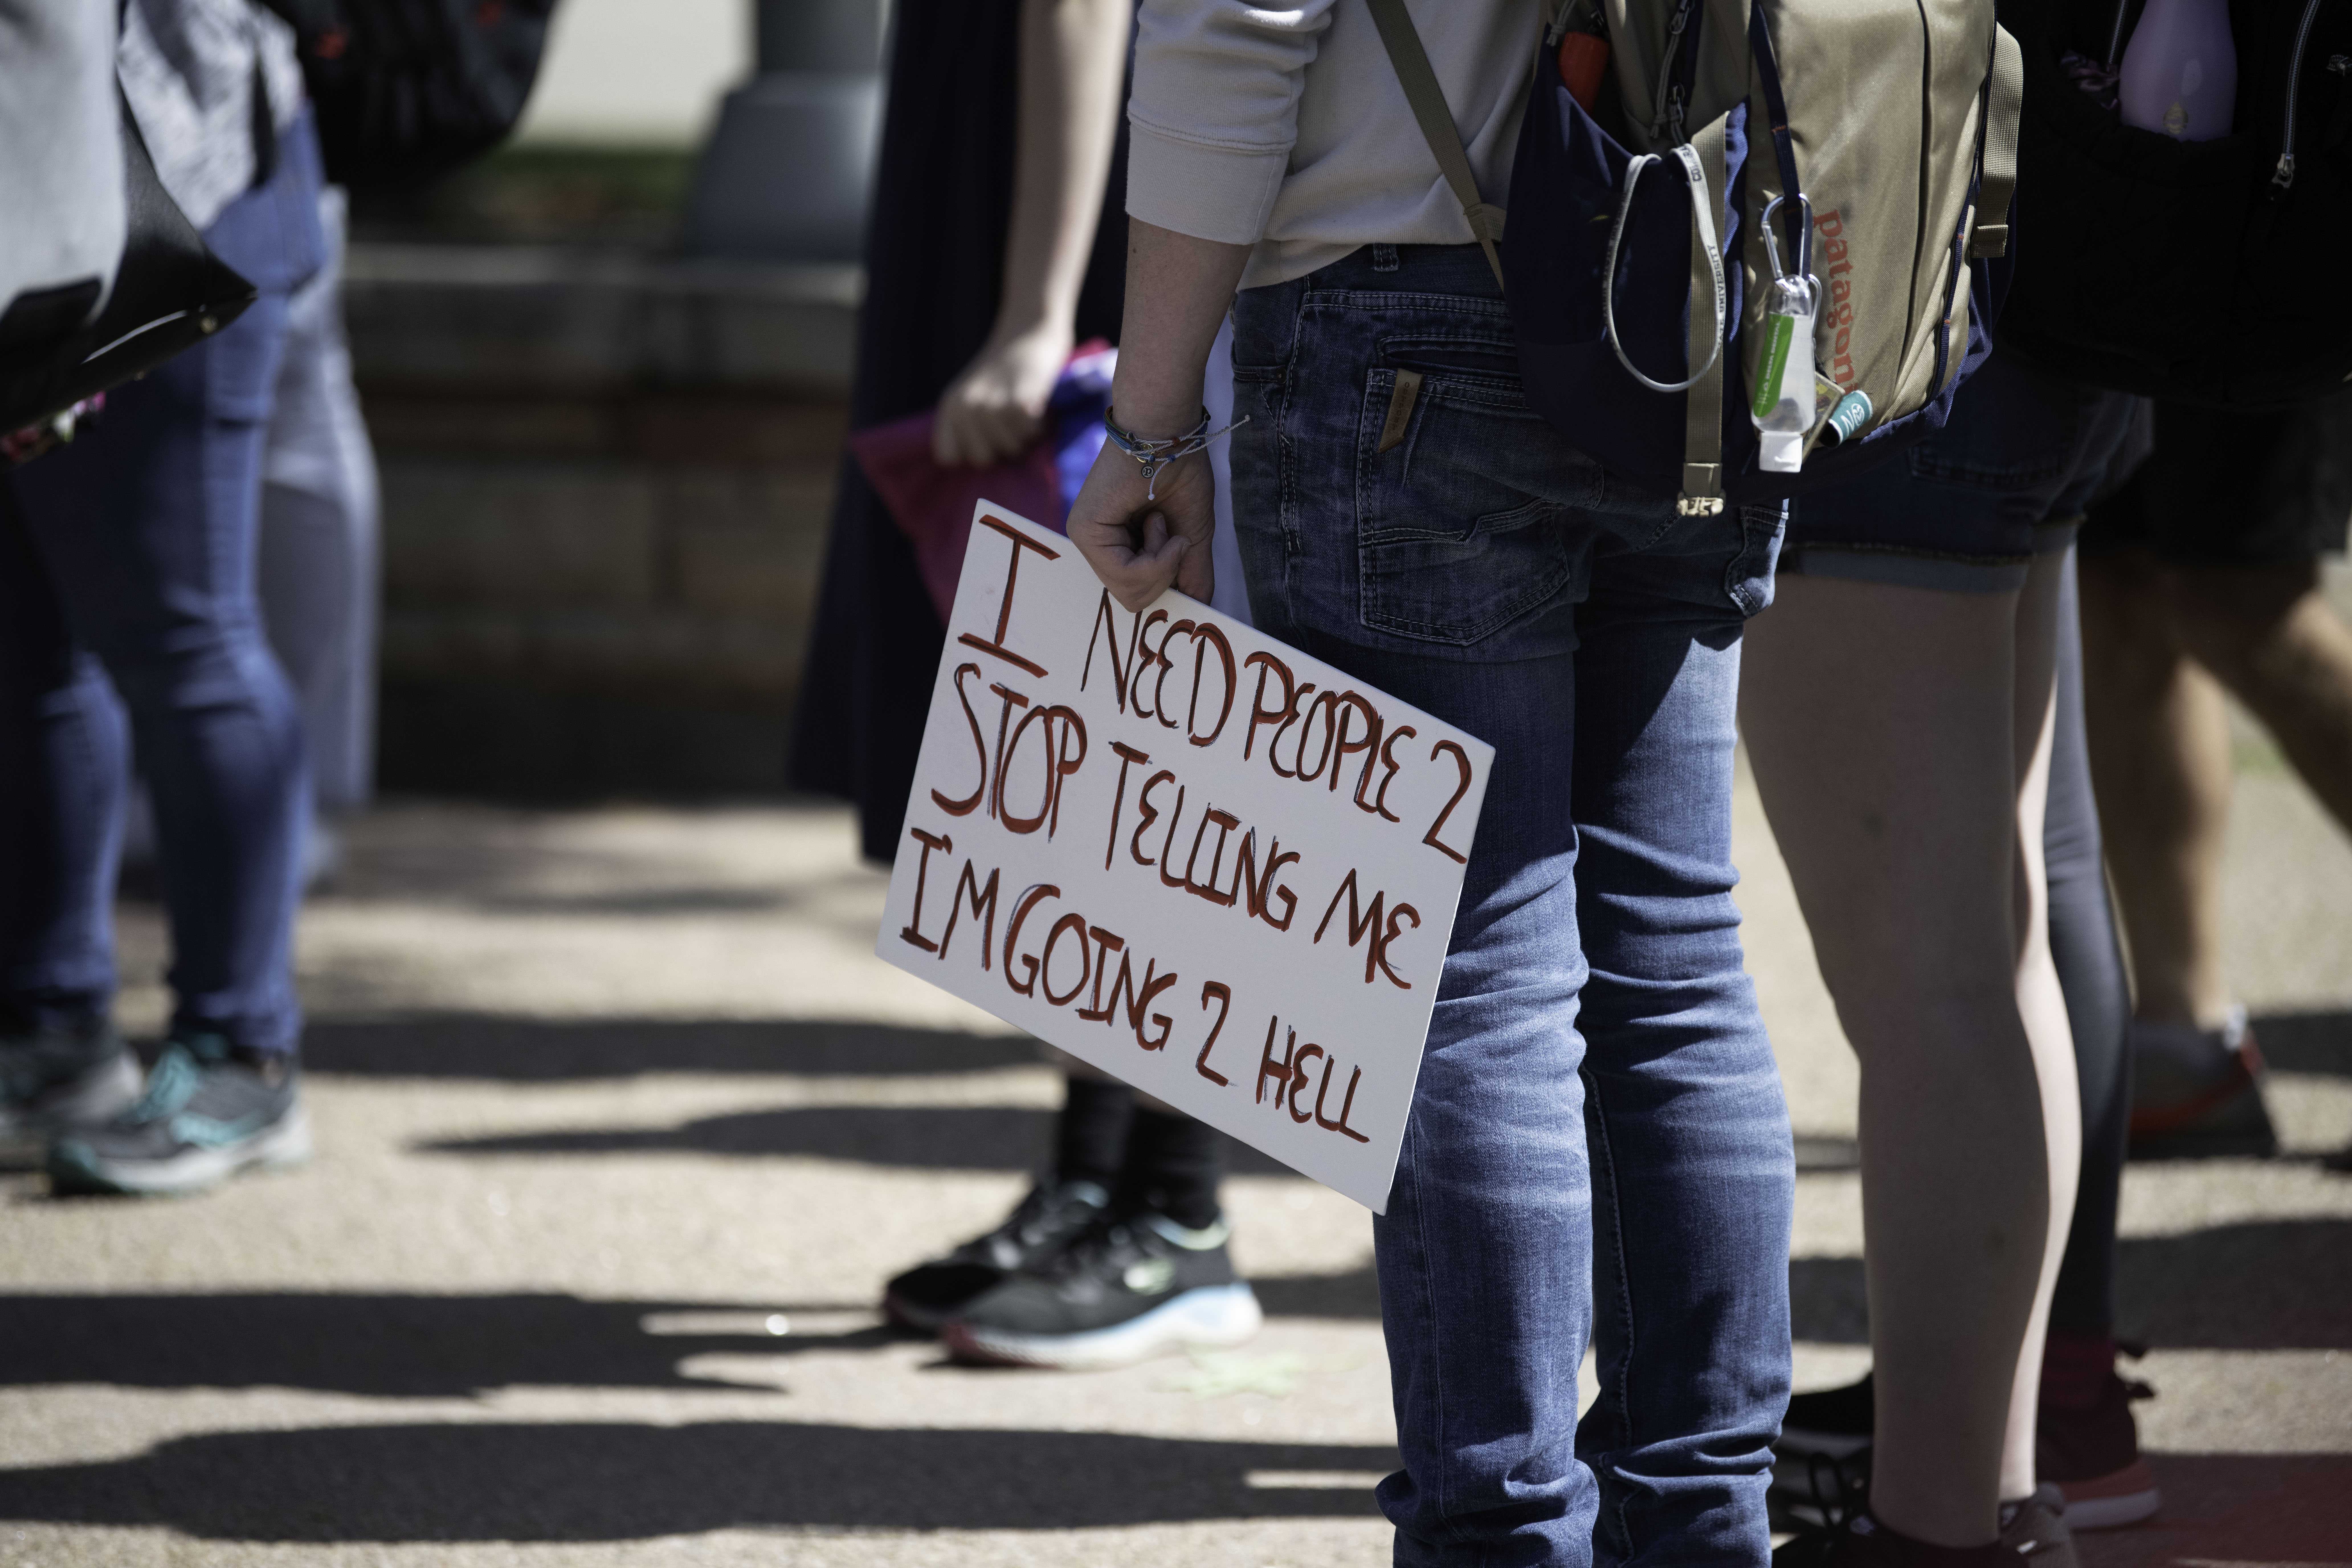 Protestor holds sign while at a Call Out CSU protest on Colorado State University Campus. Call Out CSU is a response to Colorado State University’s handling of two preachers who were last seen on campus around Sept. 14.